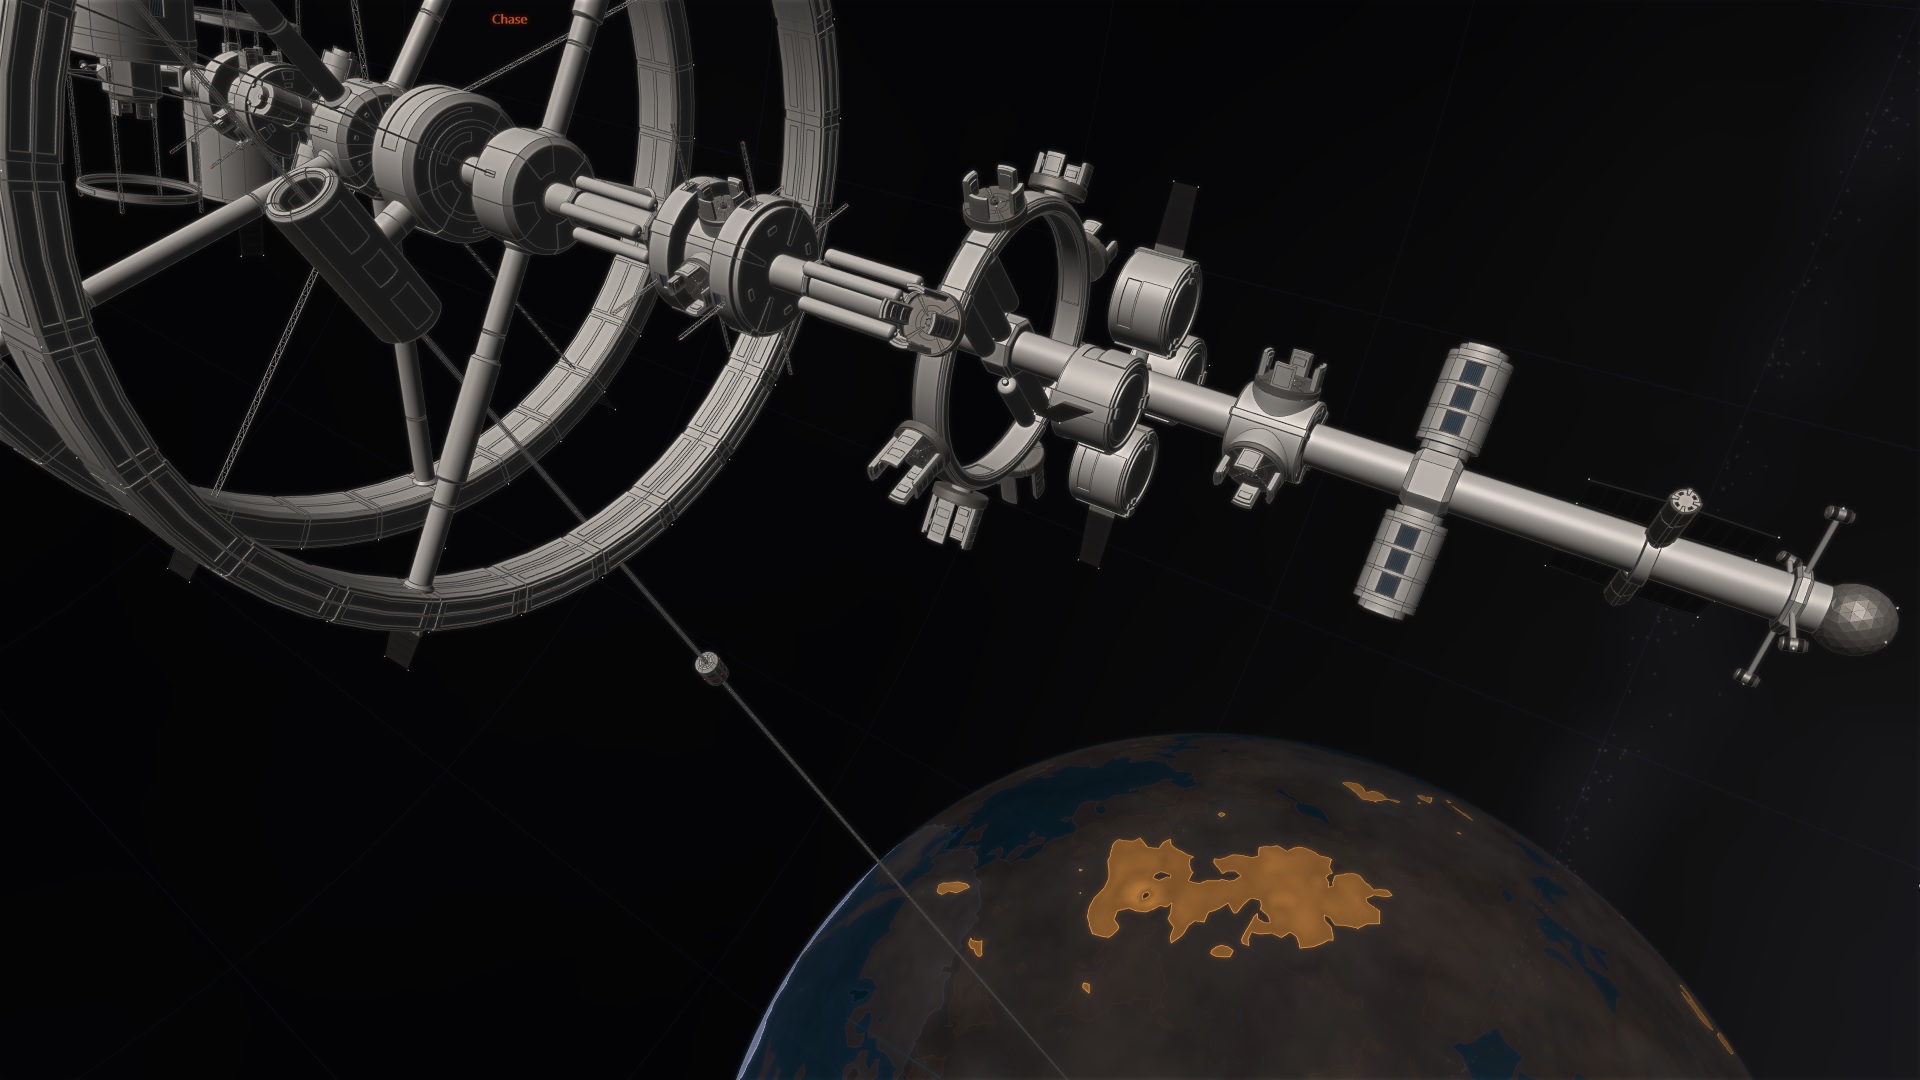 ASG space elevator